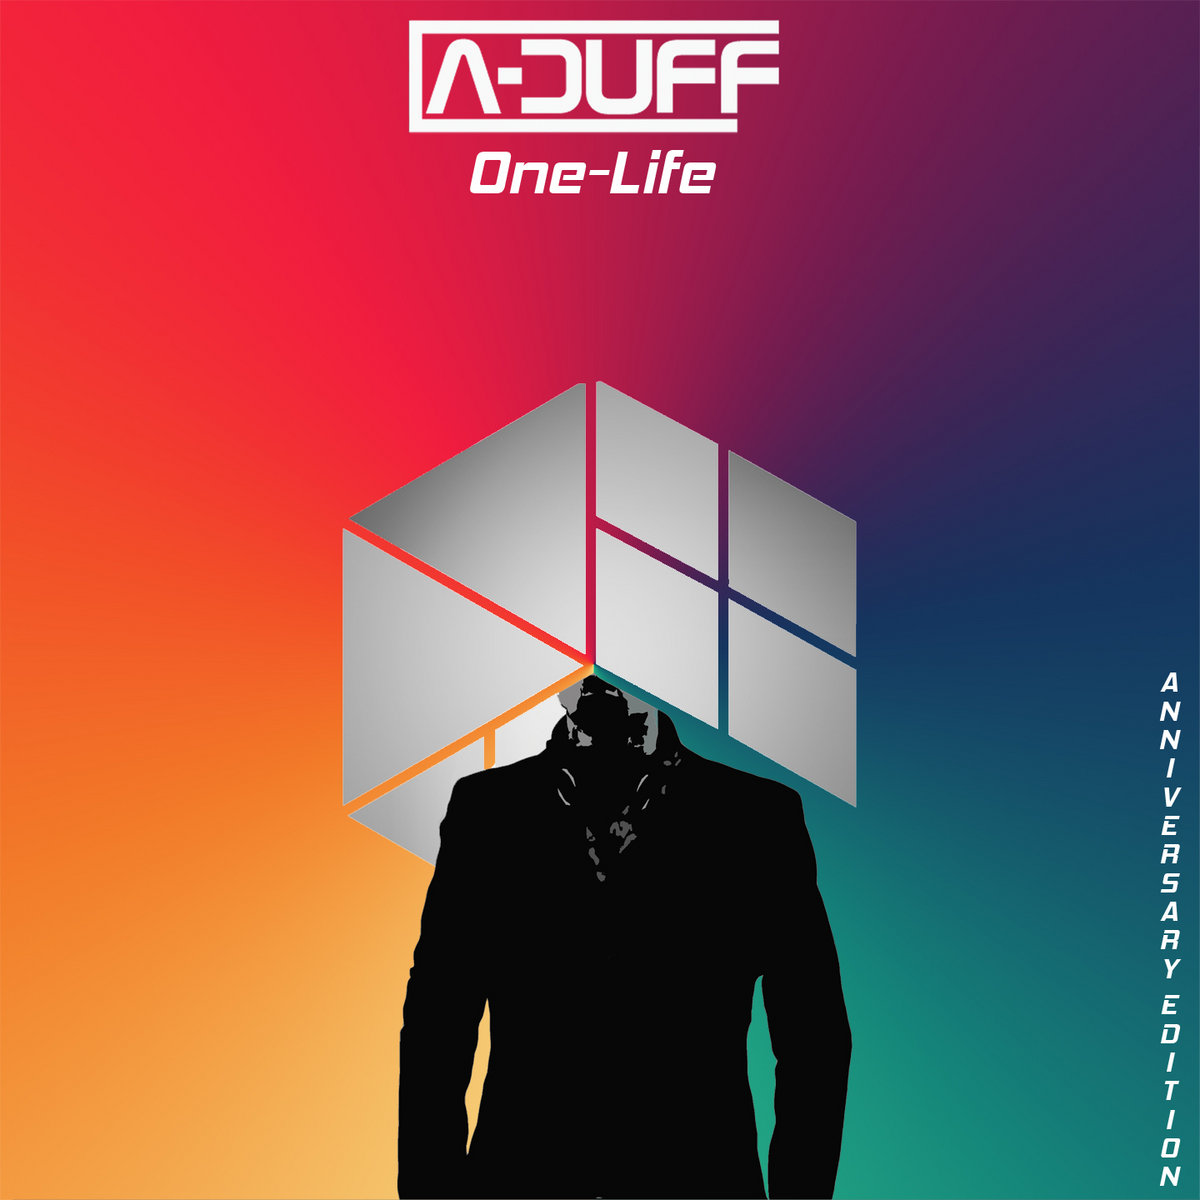 A-Duff Announces 'One Life: Anniversary Edition'